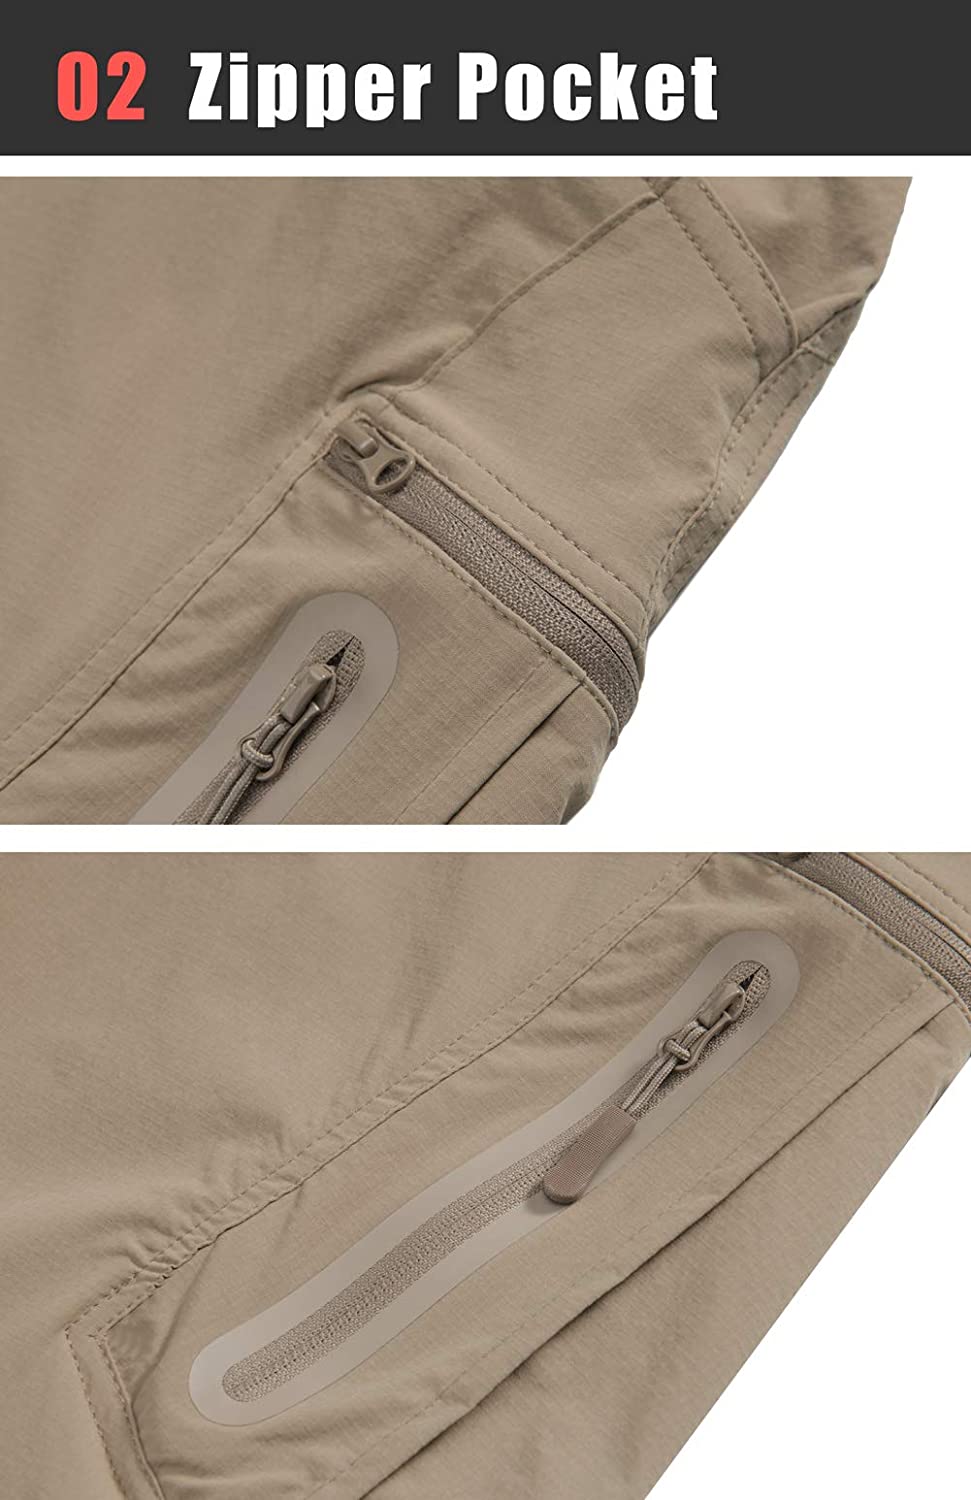 Men's long length cargo pants with zip pockets on the side of the legs. Fast drying Khaki nylon and spandex cloth.